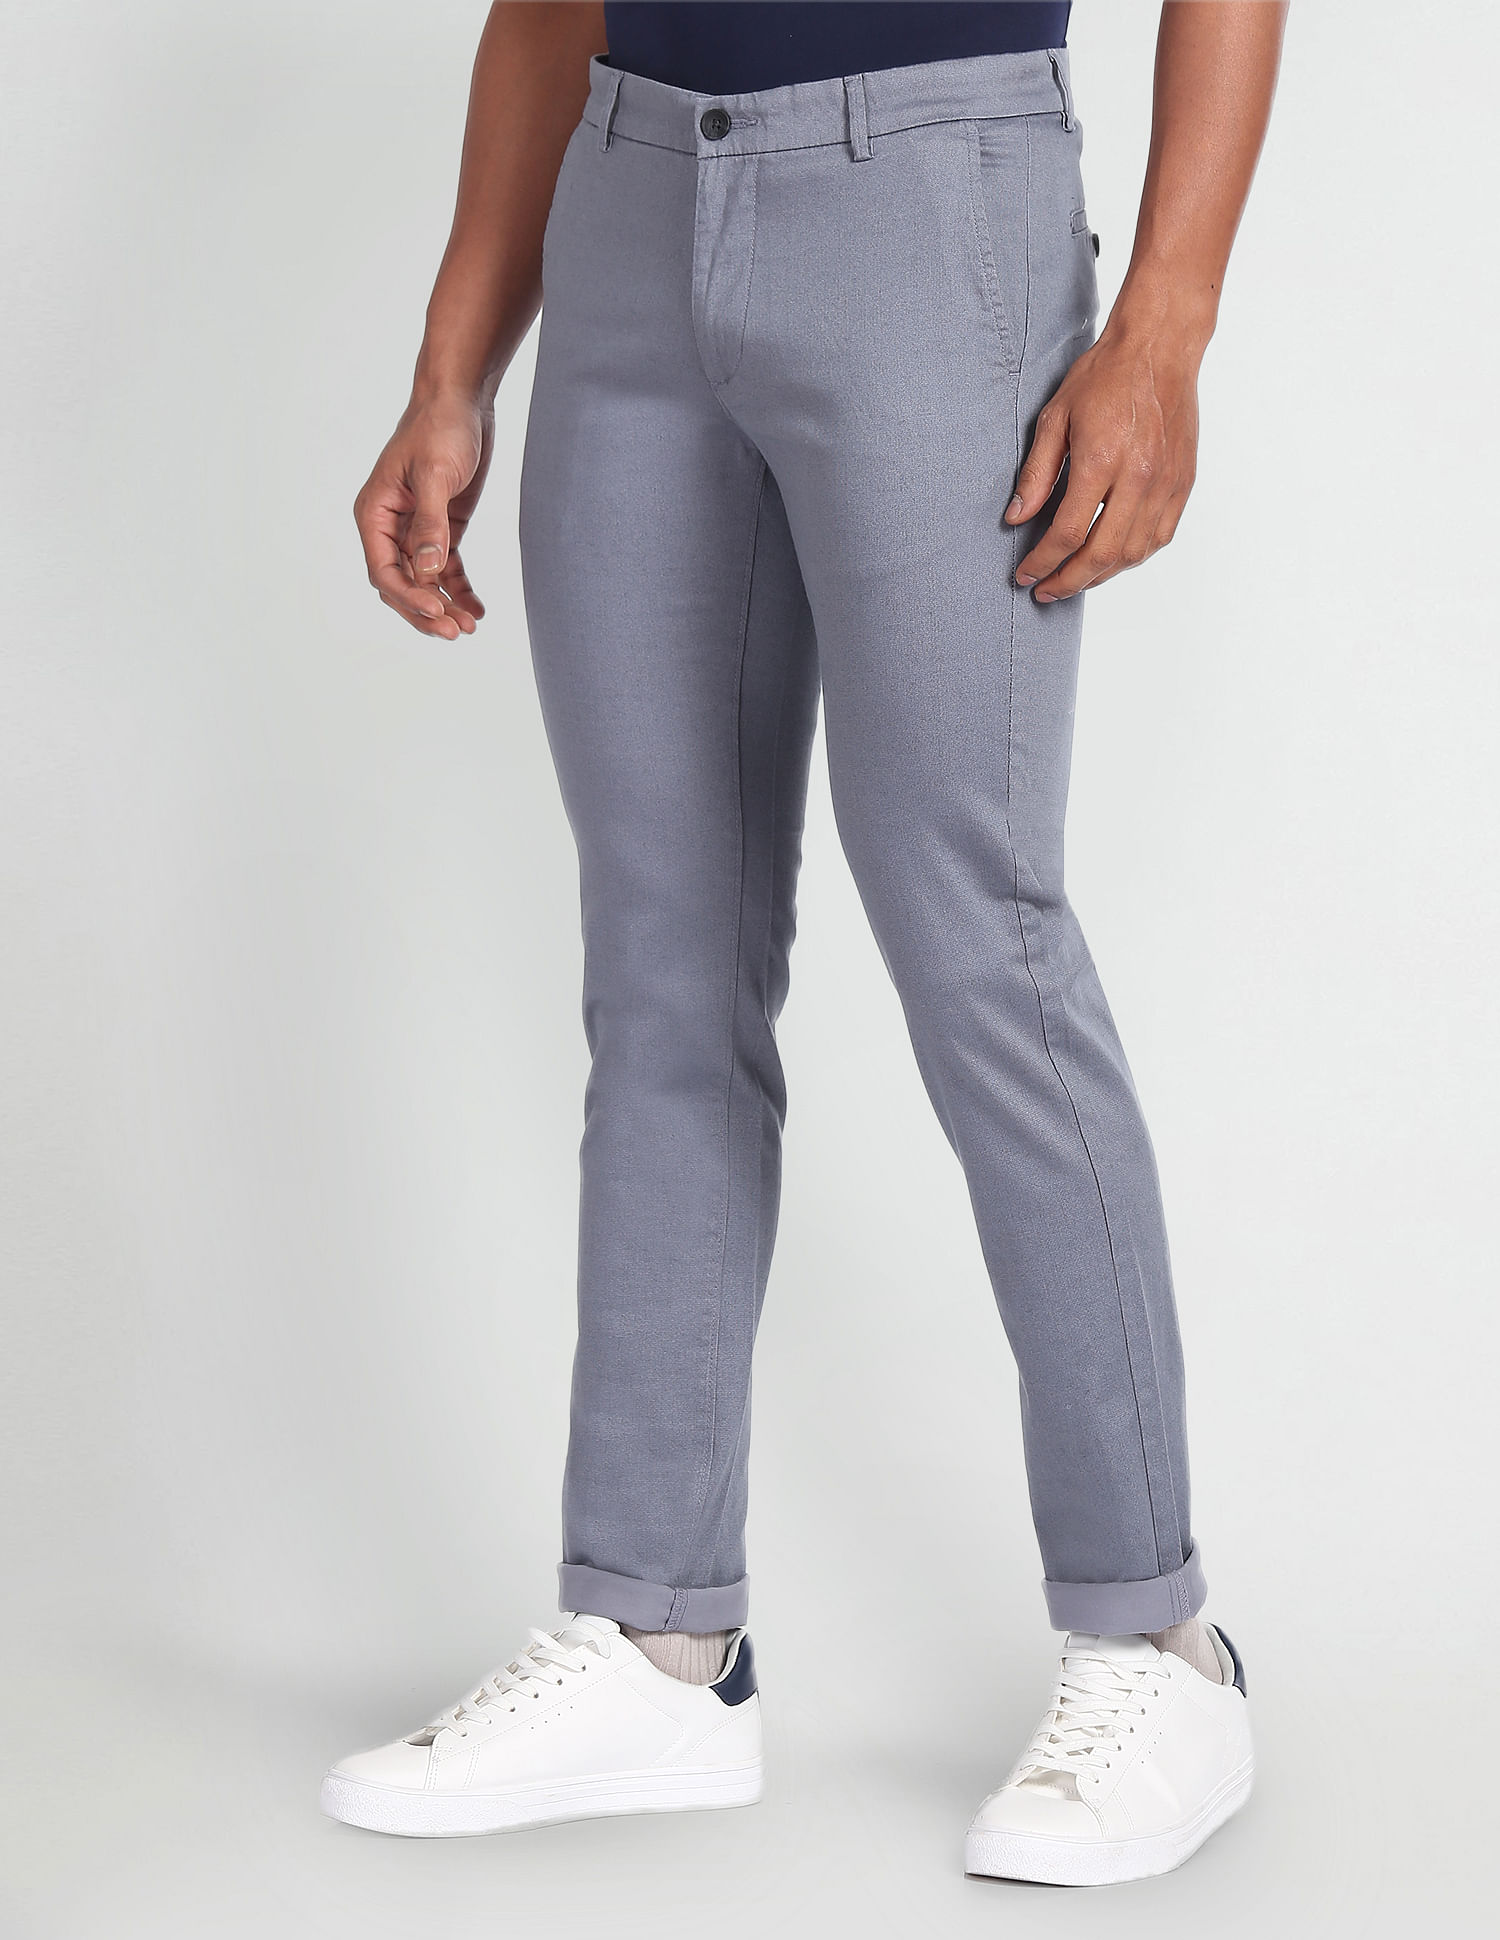 Flat Front Trouser in Navy Stretch Cotton Twill - Cad & The Dandy